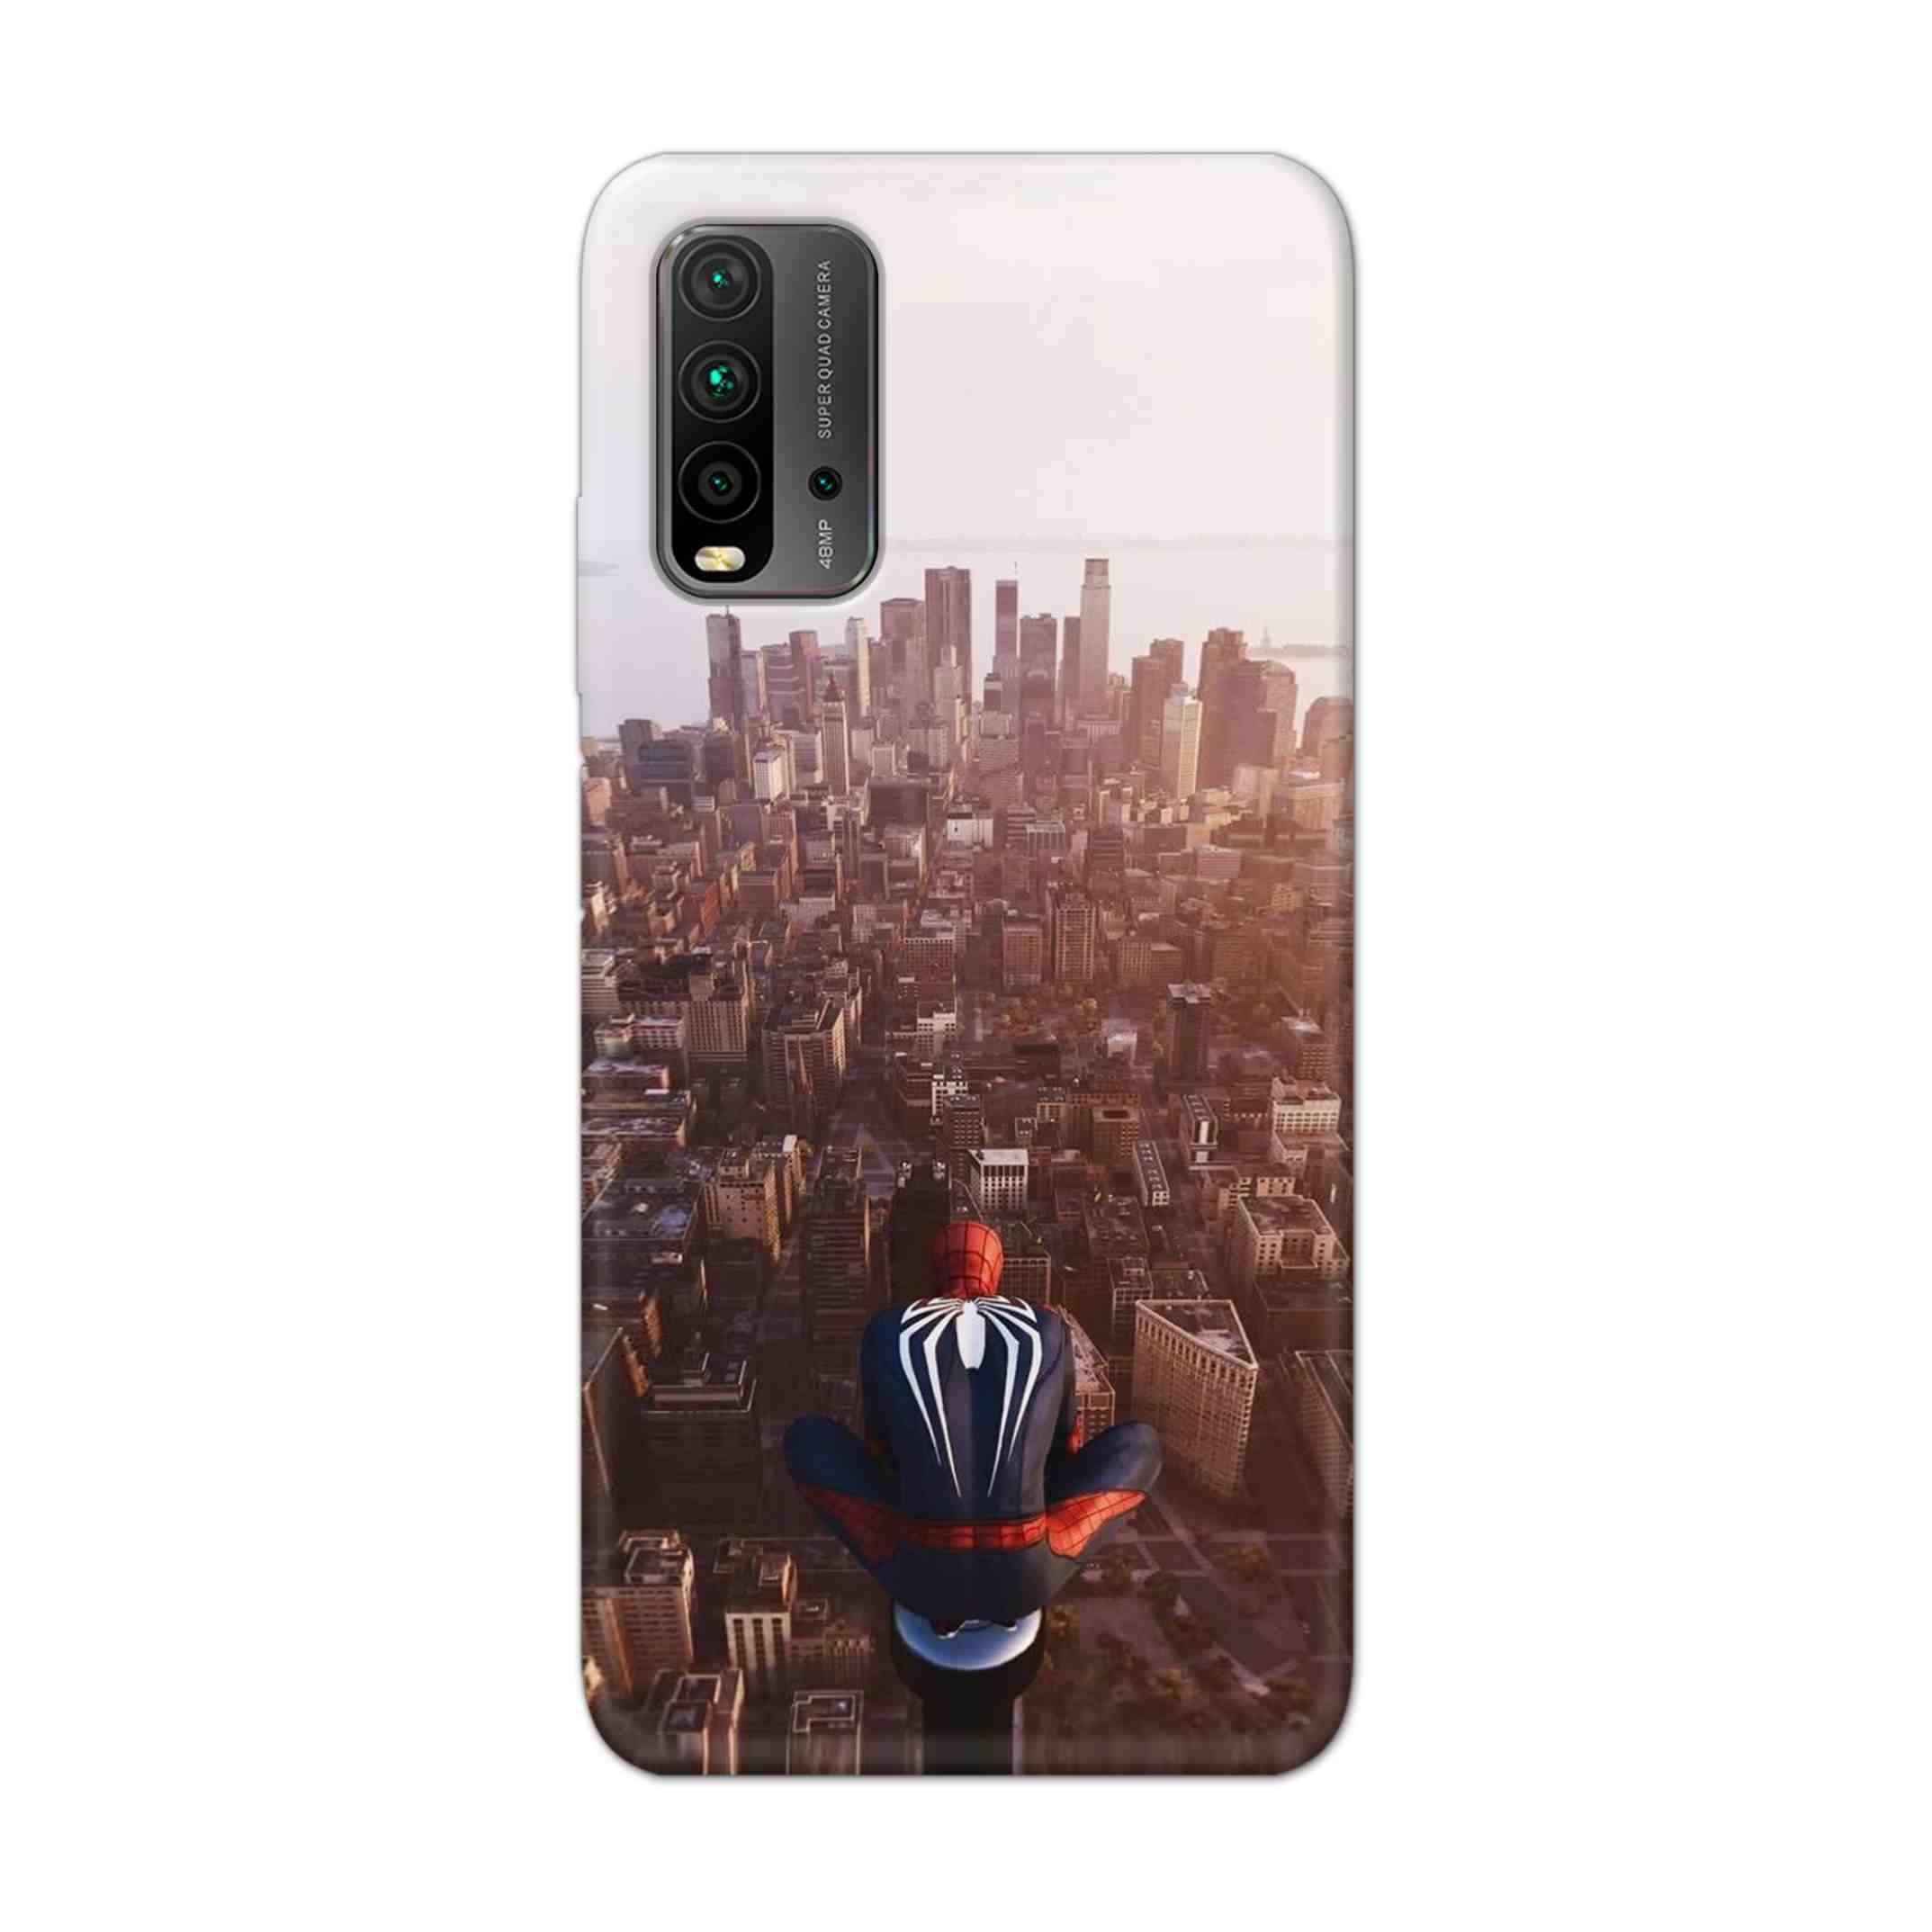 Buy City Of Spiderman Hard Back Mobile Phone Case Cover For Redmi 9 Power Online